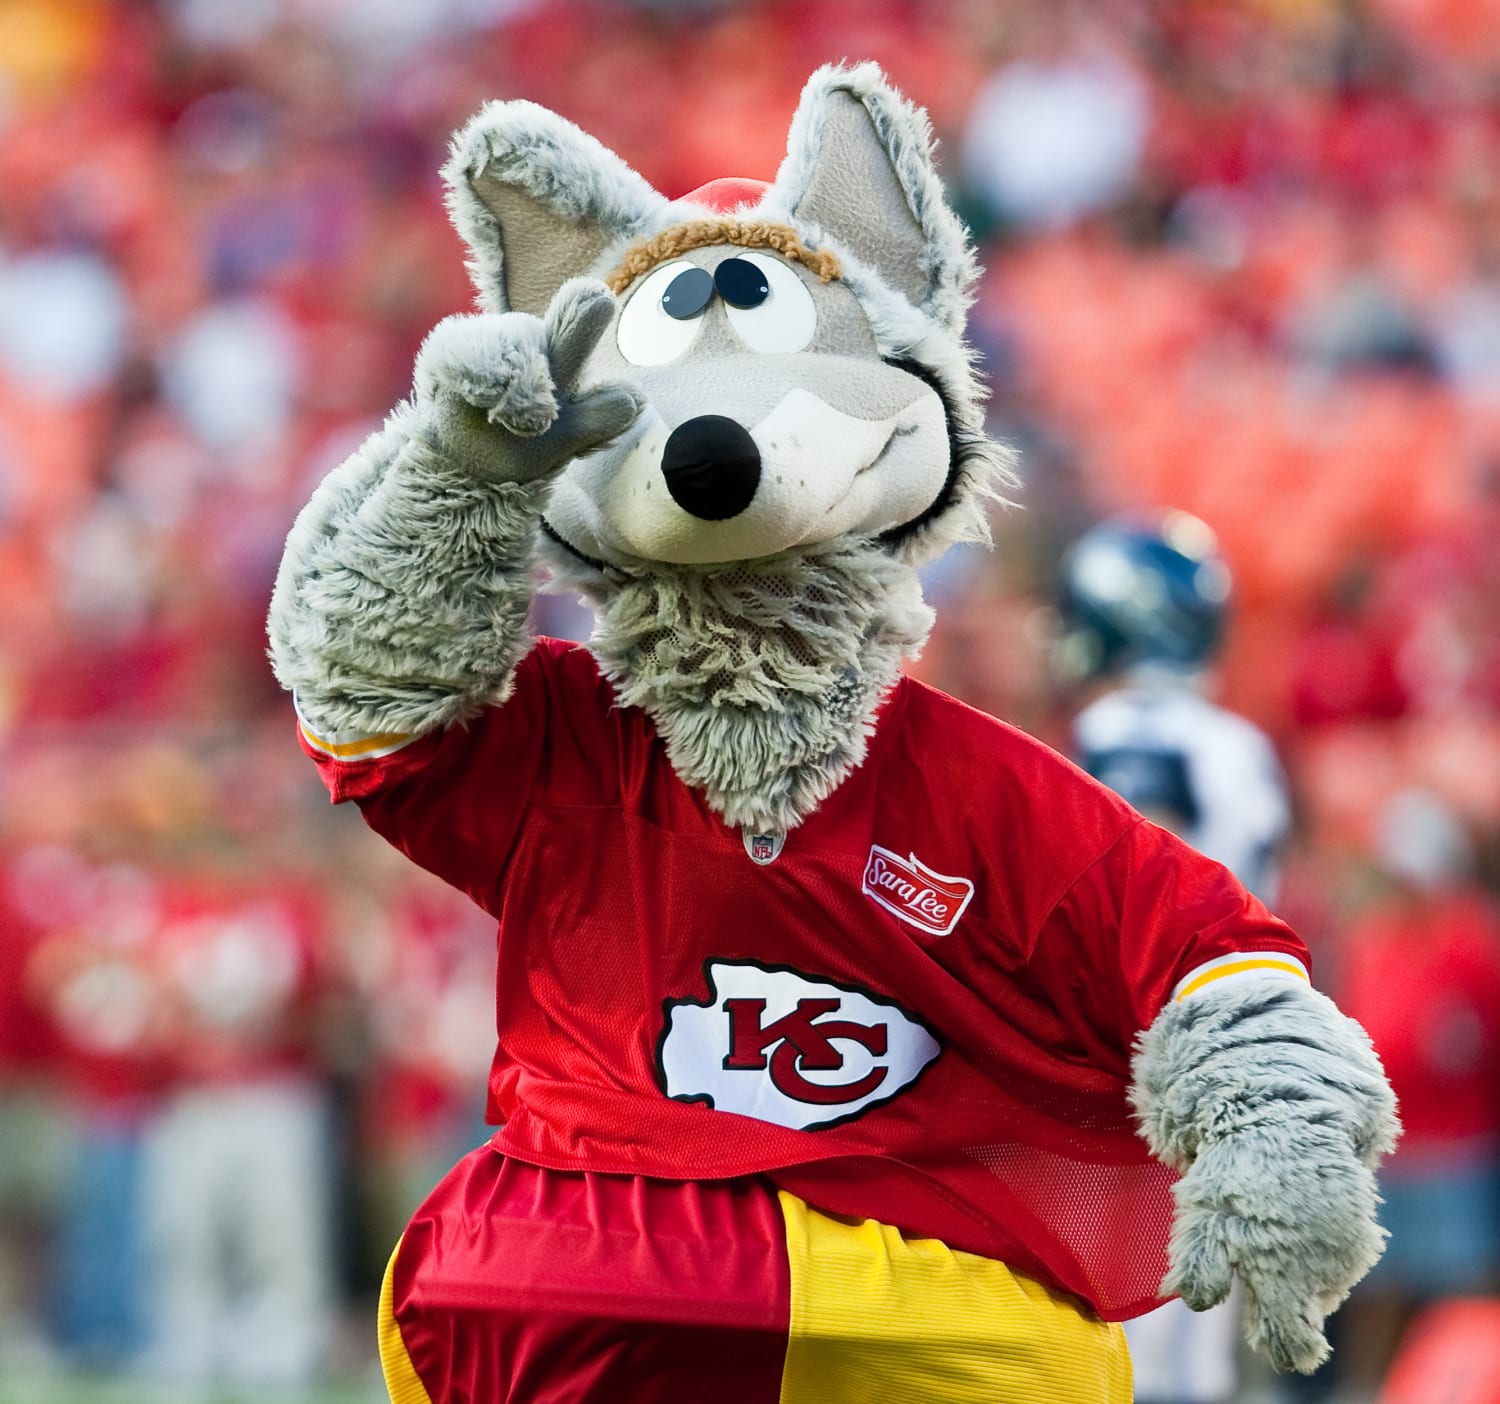 Who is the Kansas City Chiefs mascot?